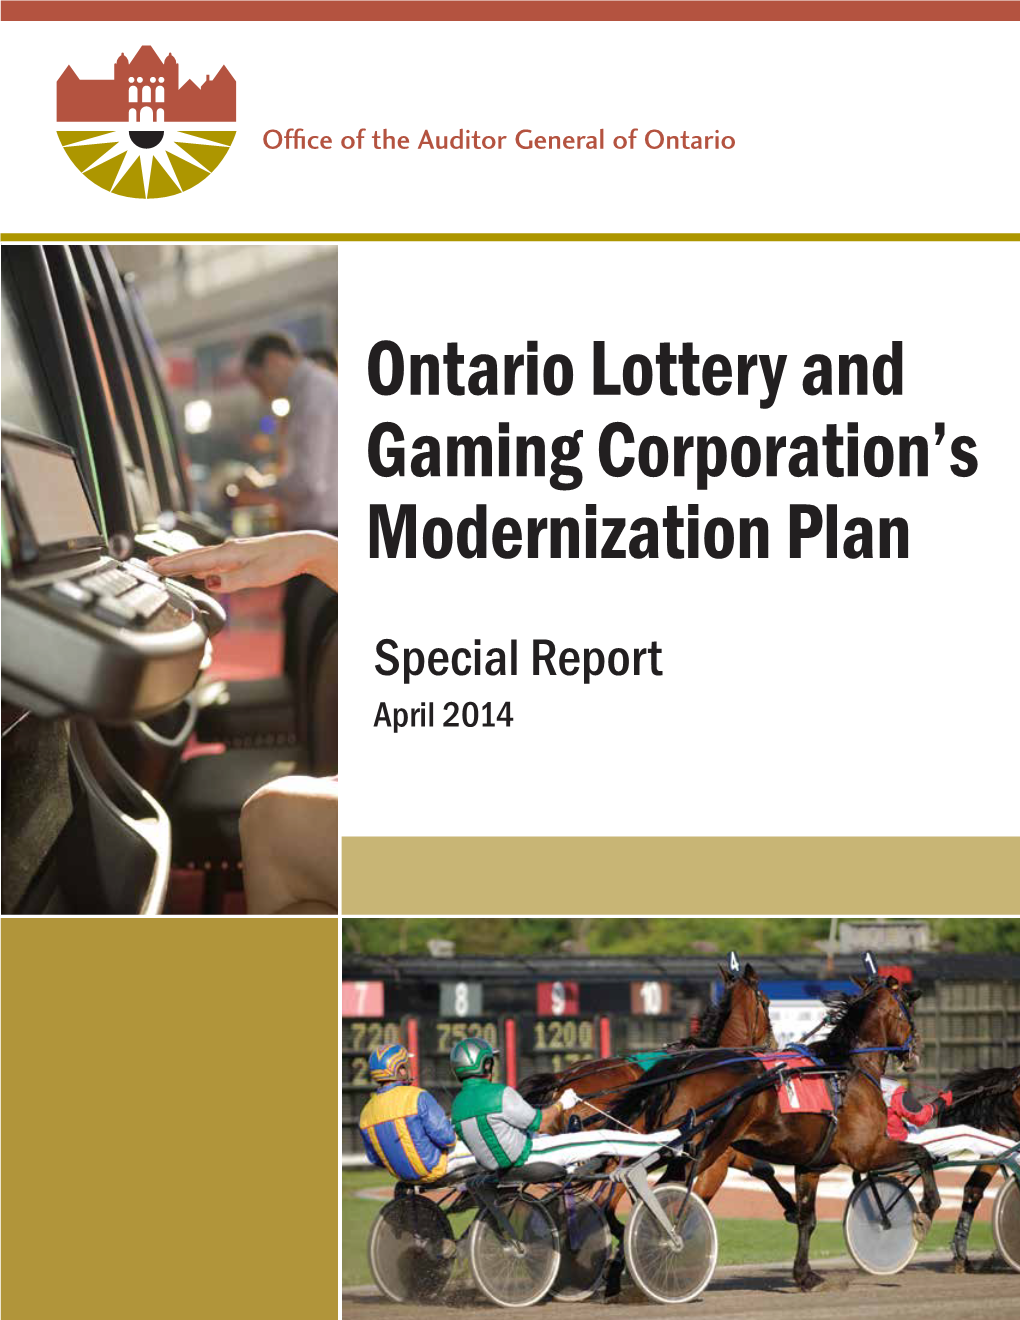 Special Report: Ontario Lottery and Gaming Corporation's